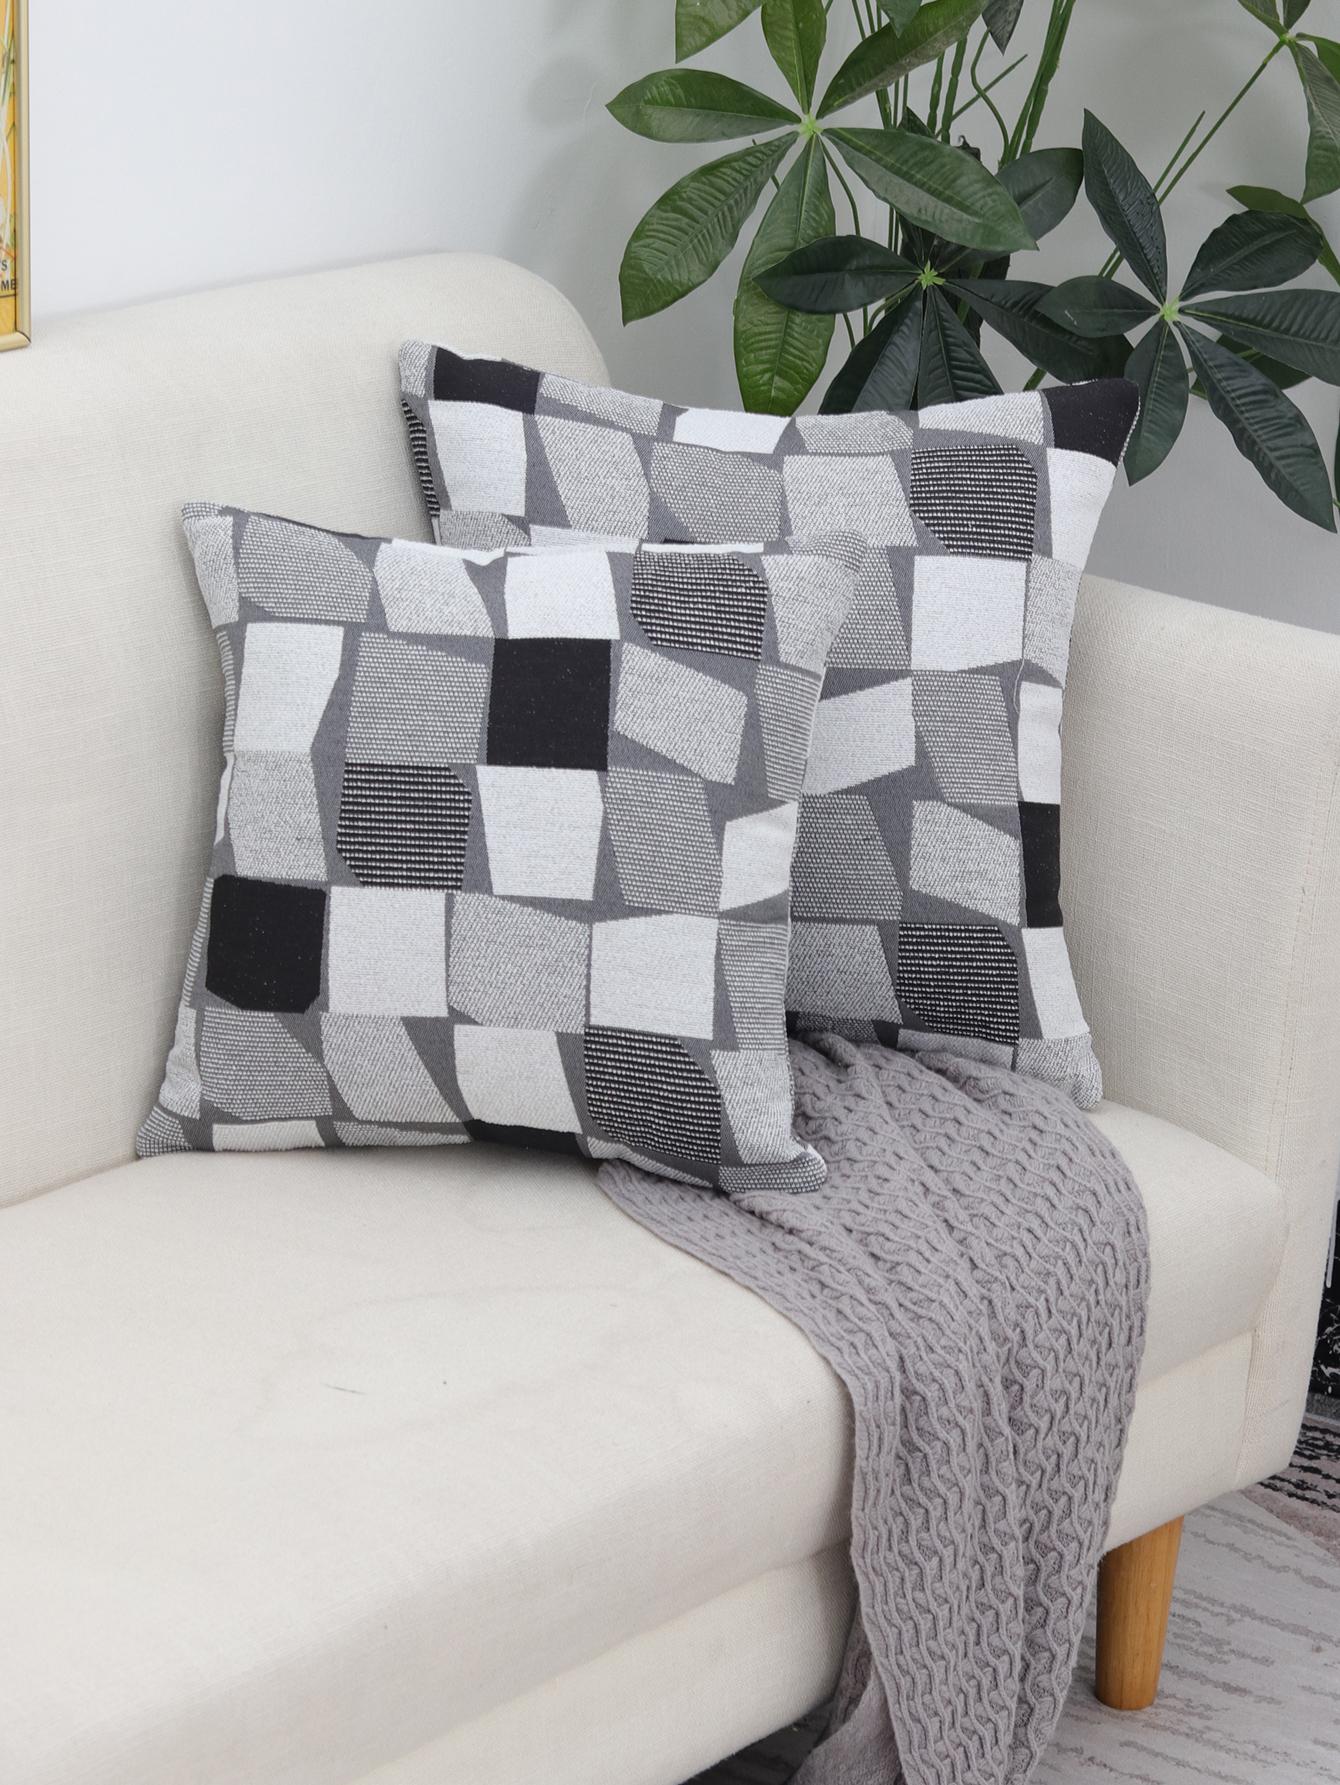 1pc Plaid Pattern Cushion Cover, Modern Woven Fabric Decorative Throw Pillow Case For Home